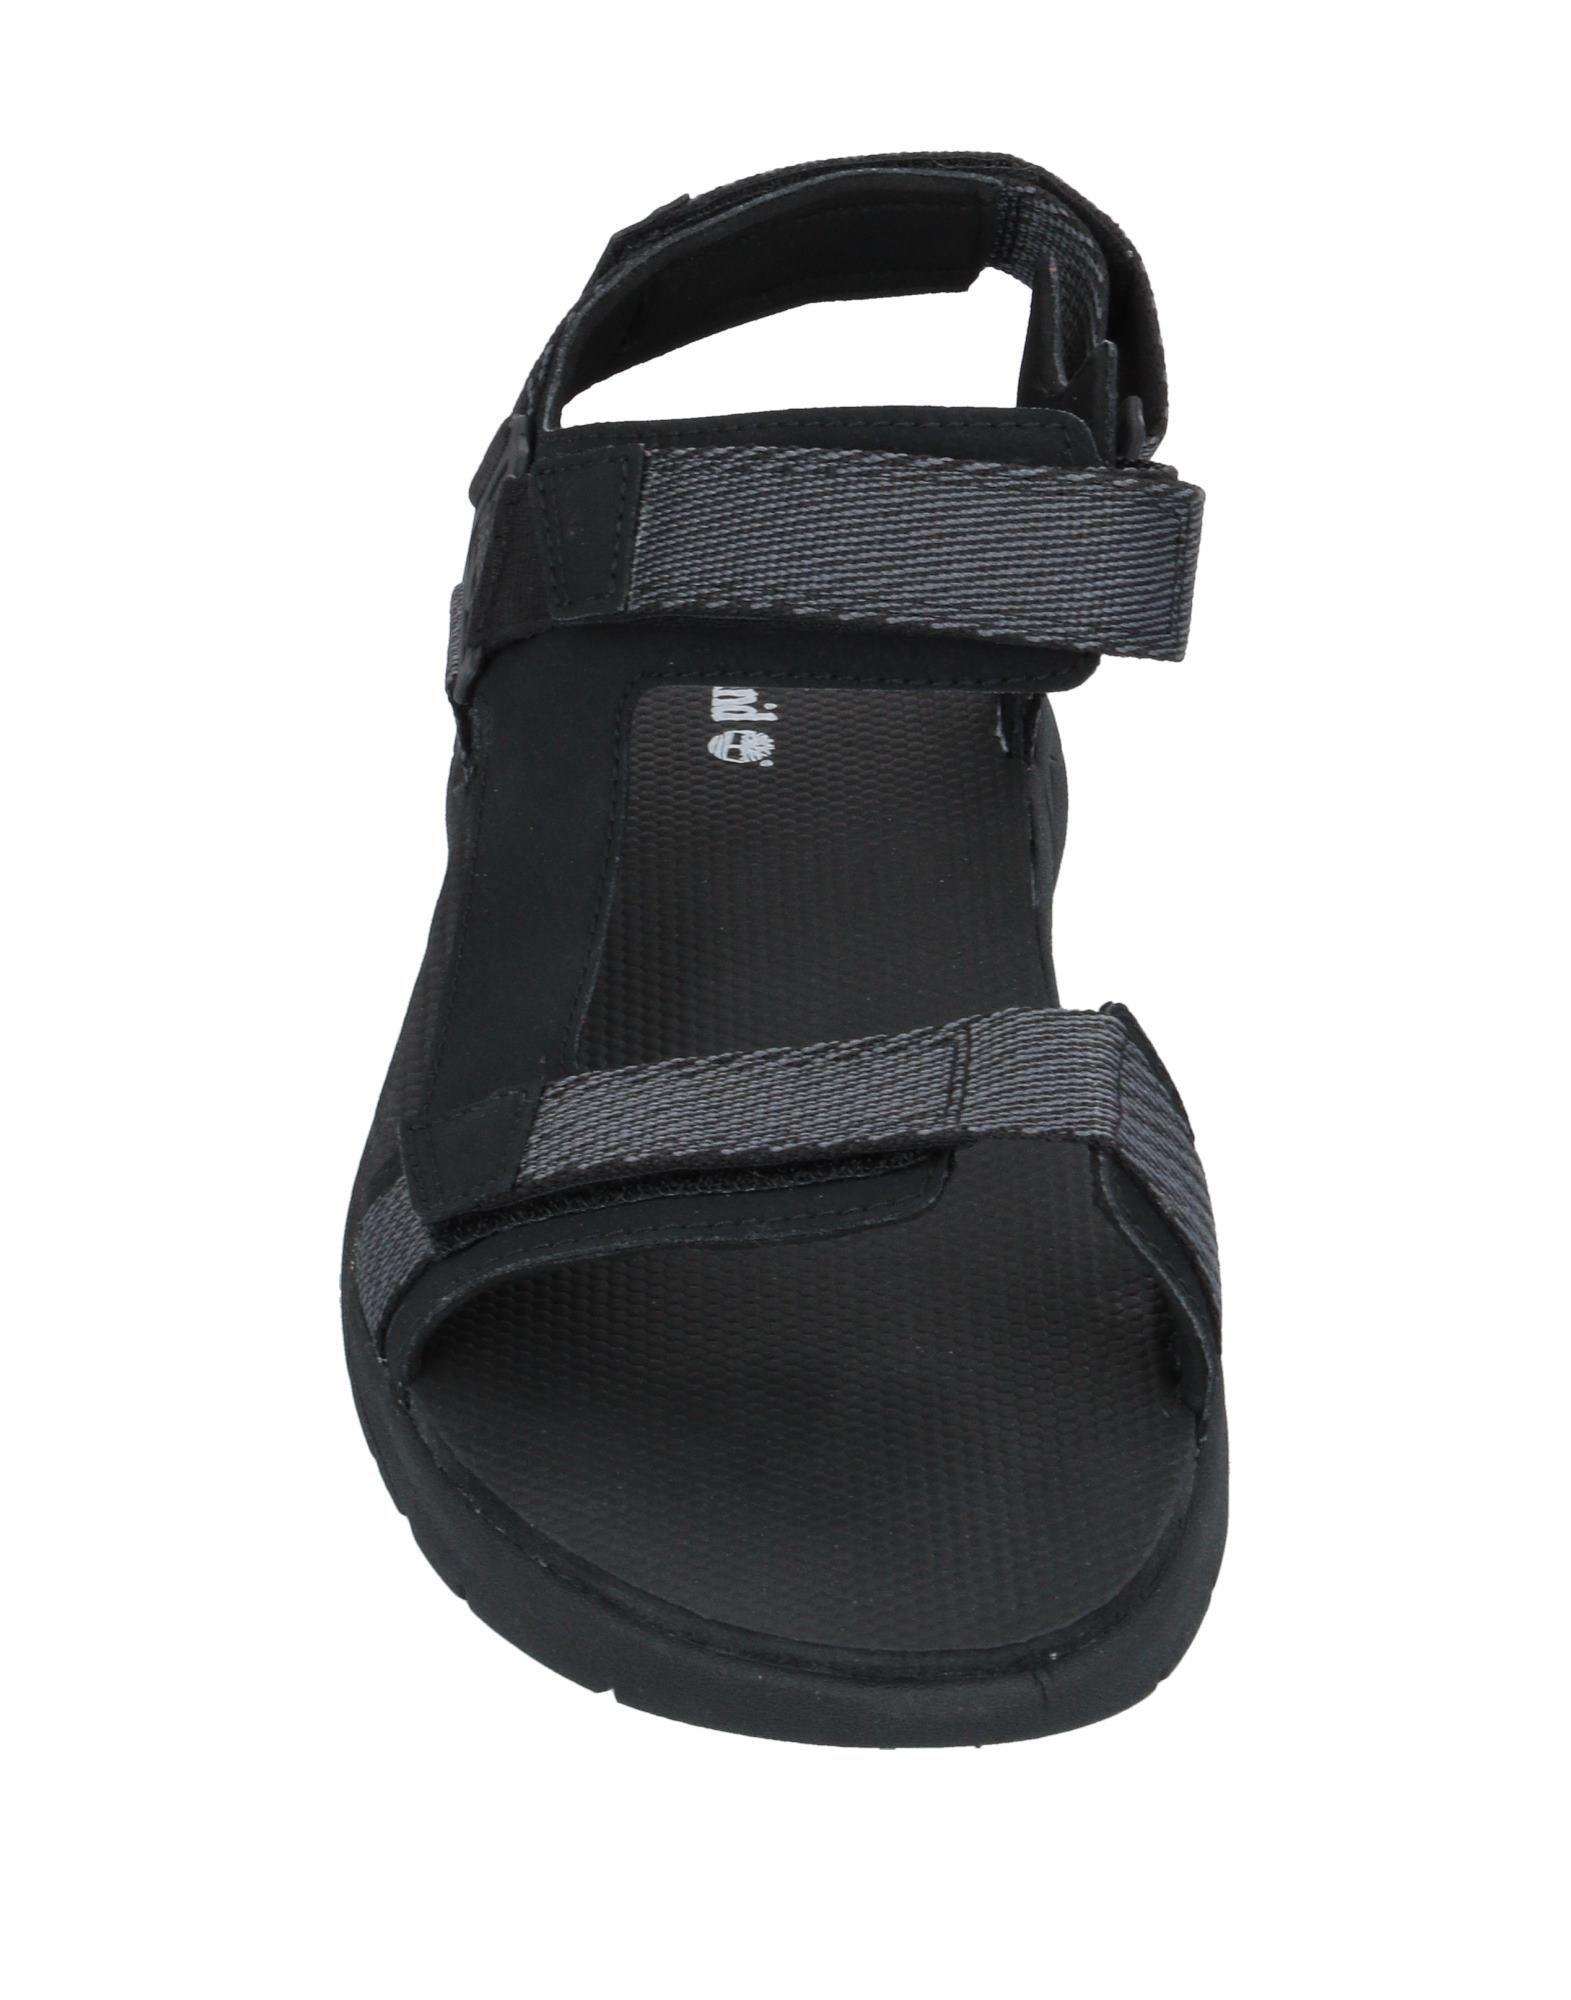 Timberland Sandals in Black for Men - Lyst